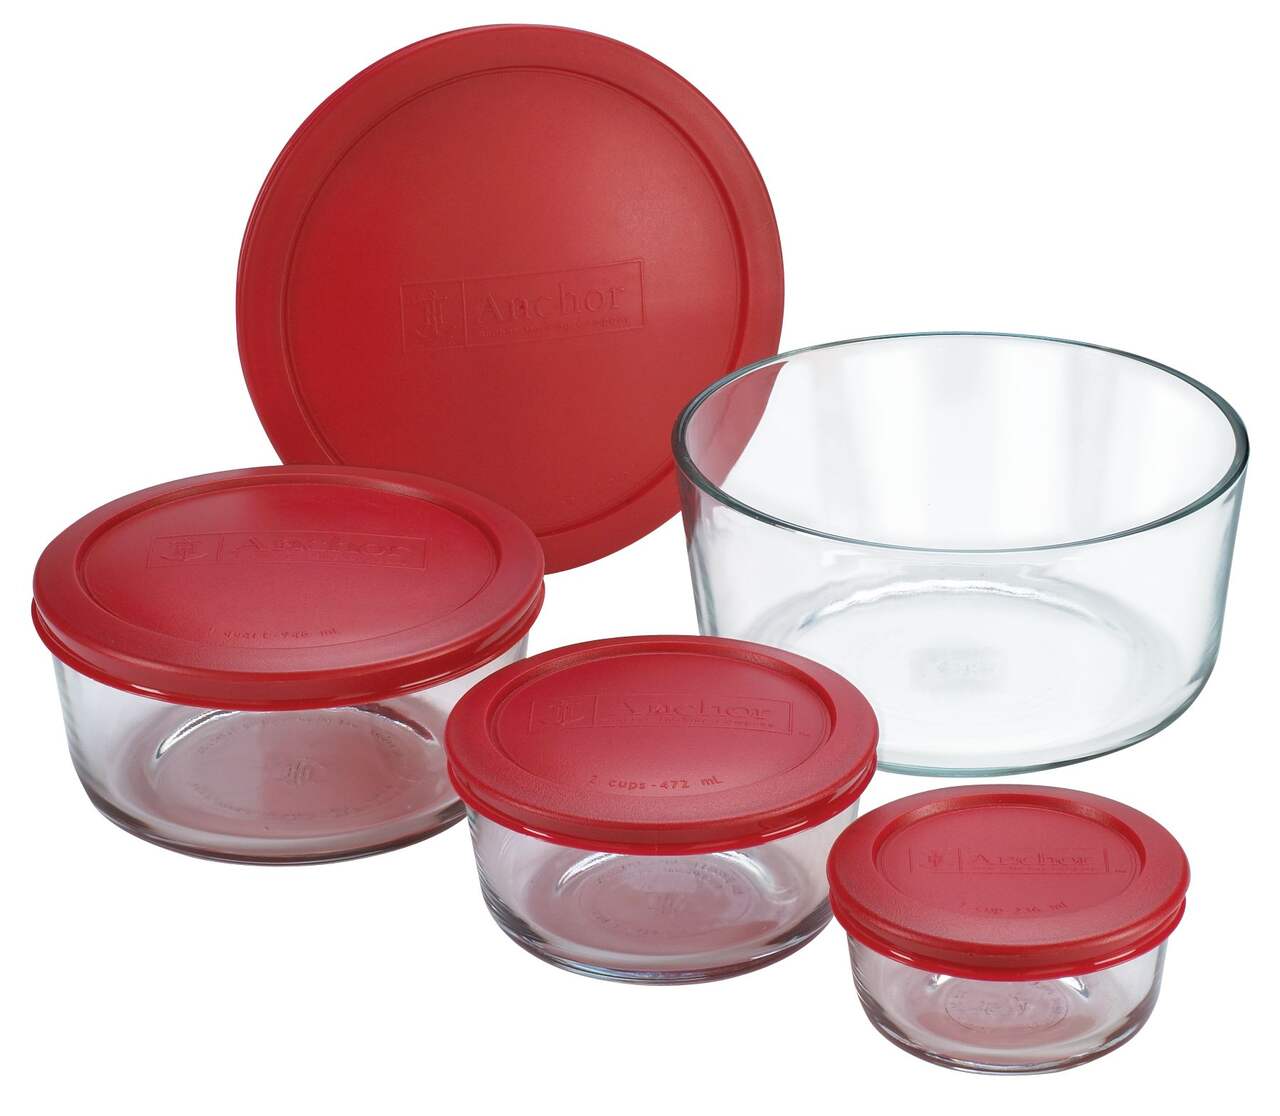 https://media-www.canadiantire.ca/product/living/kitchen/bakeware-baking-prep/0422024/8-piece-round-glass-storage-be3765a5-b876-40de-9c6e-33f6b2d4bfec-jpgrendition.jpg?imdensity=1&imwidth=1244&impolicy=mZoom